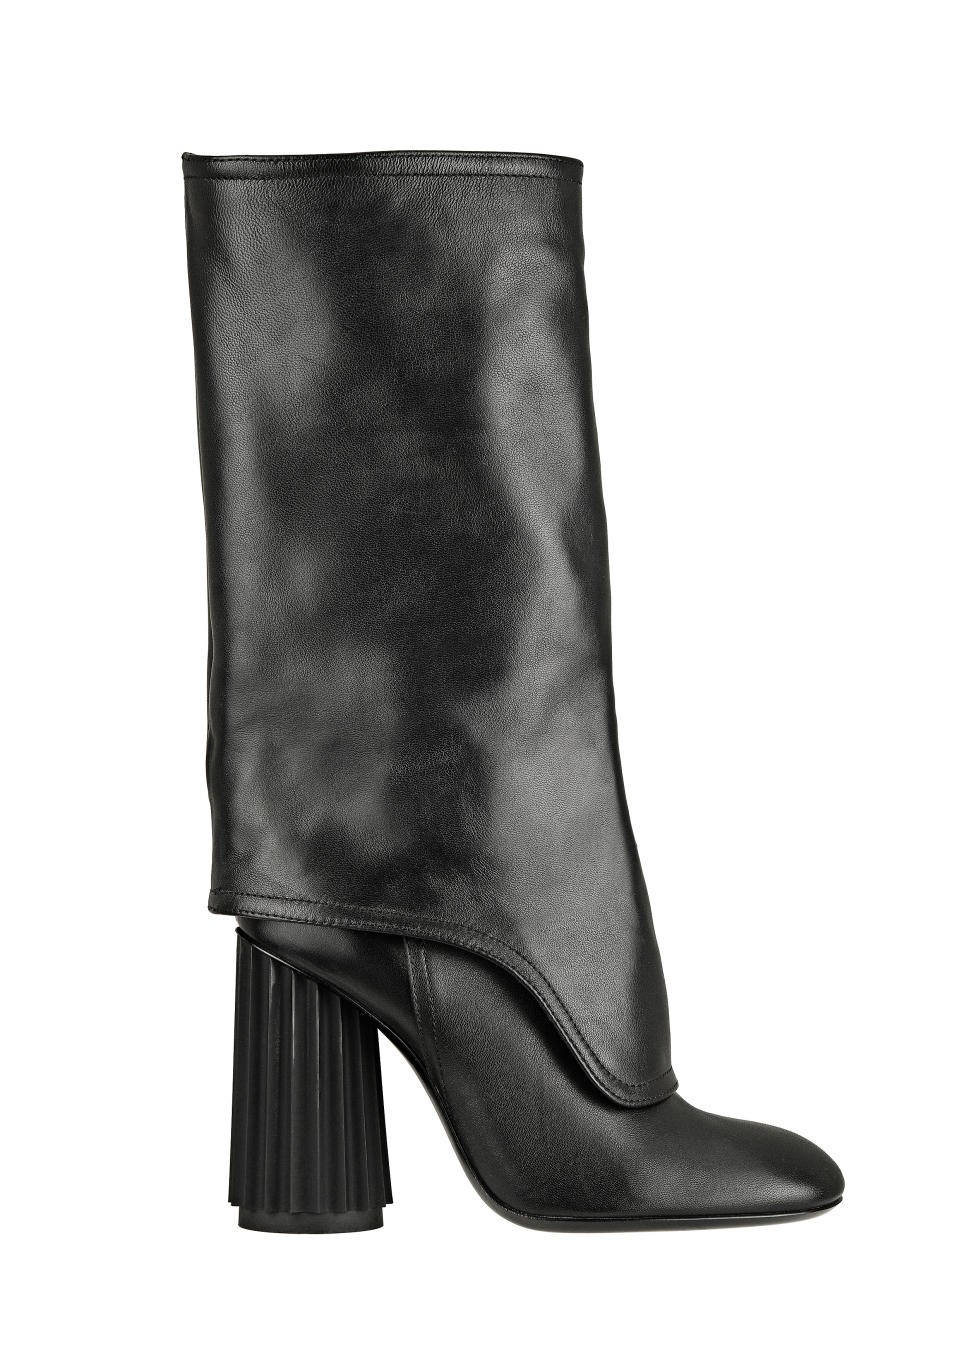 AGL’s foldover boot with a Greek column inspired stacked heel. - Credit: Thomas Wiedenhofer